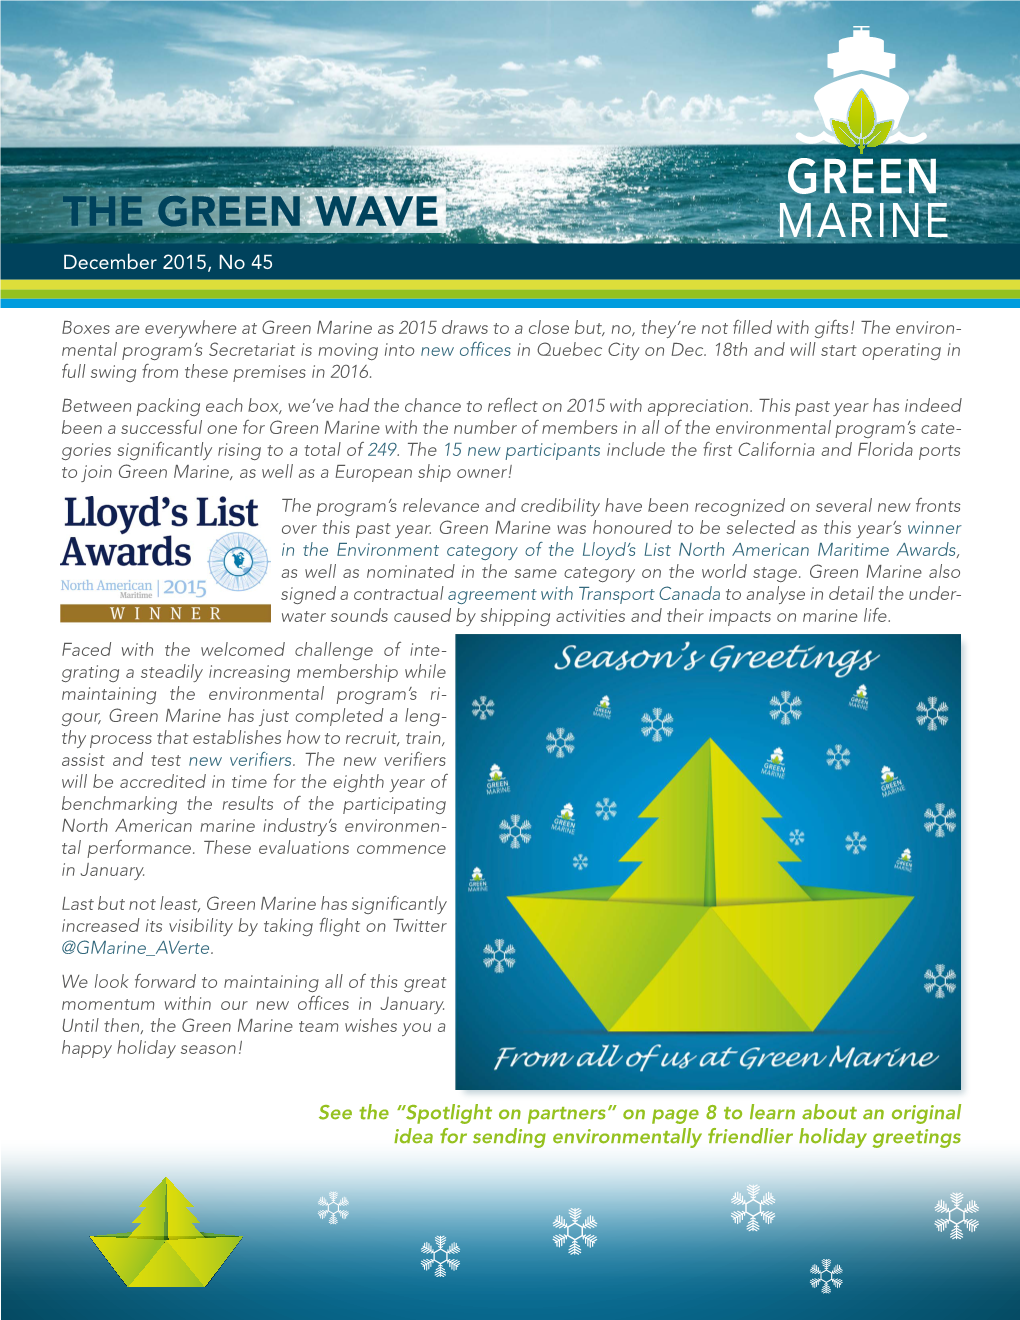 THE GREEN WAVE December 2015, No 45